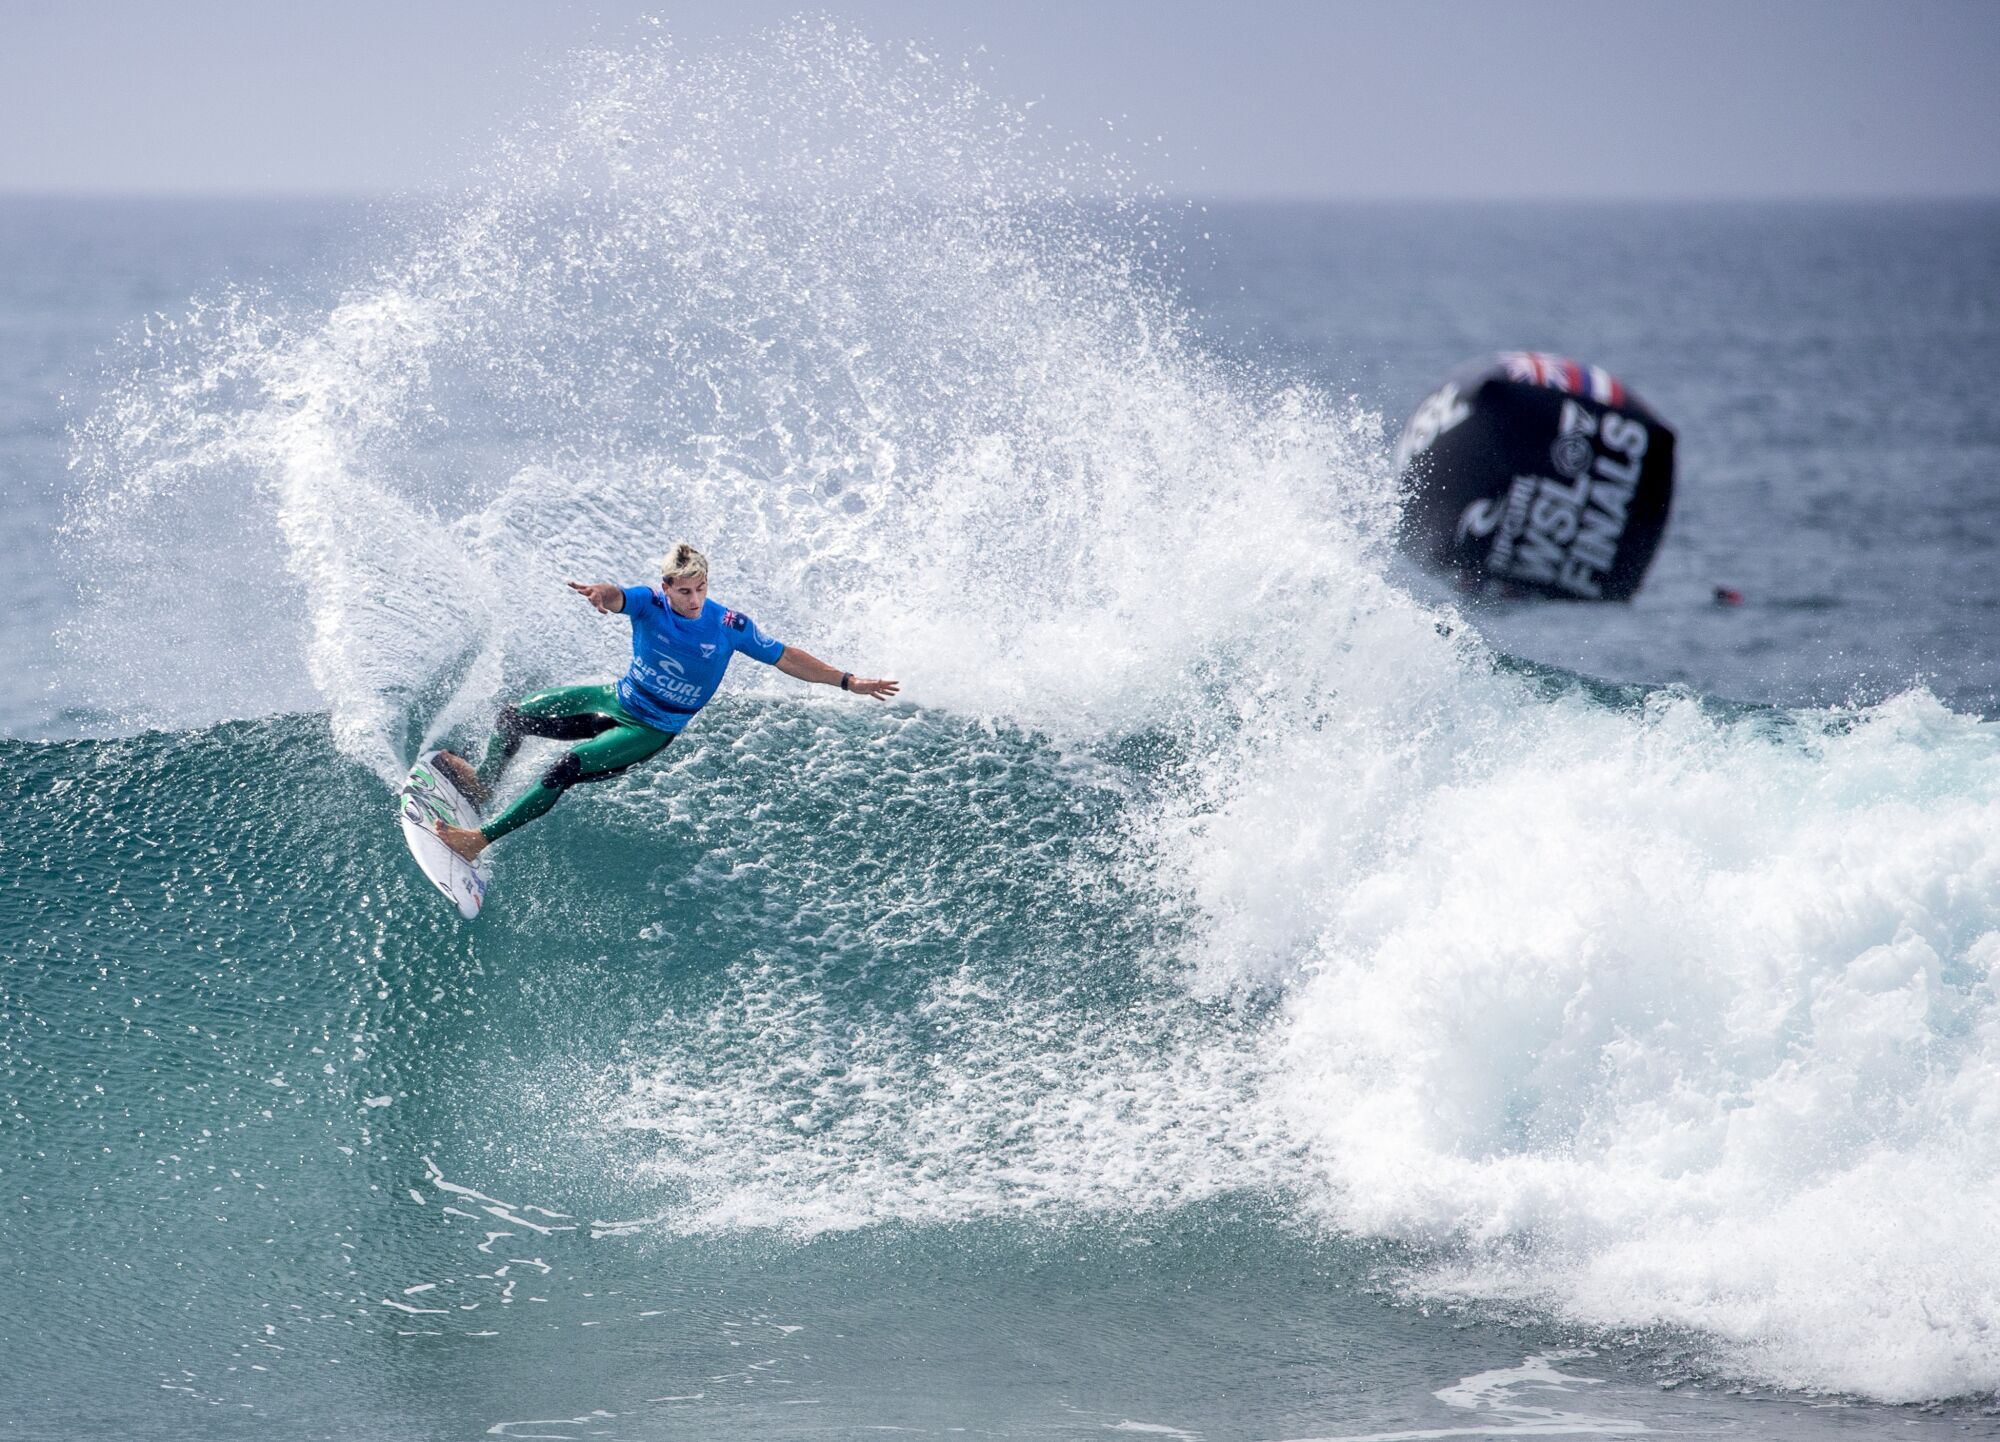 Jack Robinson of Australia slashes high on a wave at the WSL Finals.